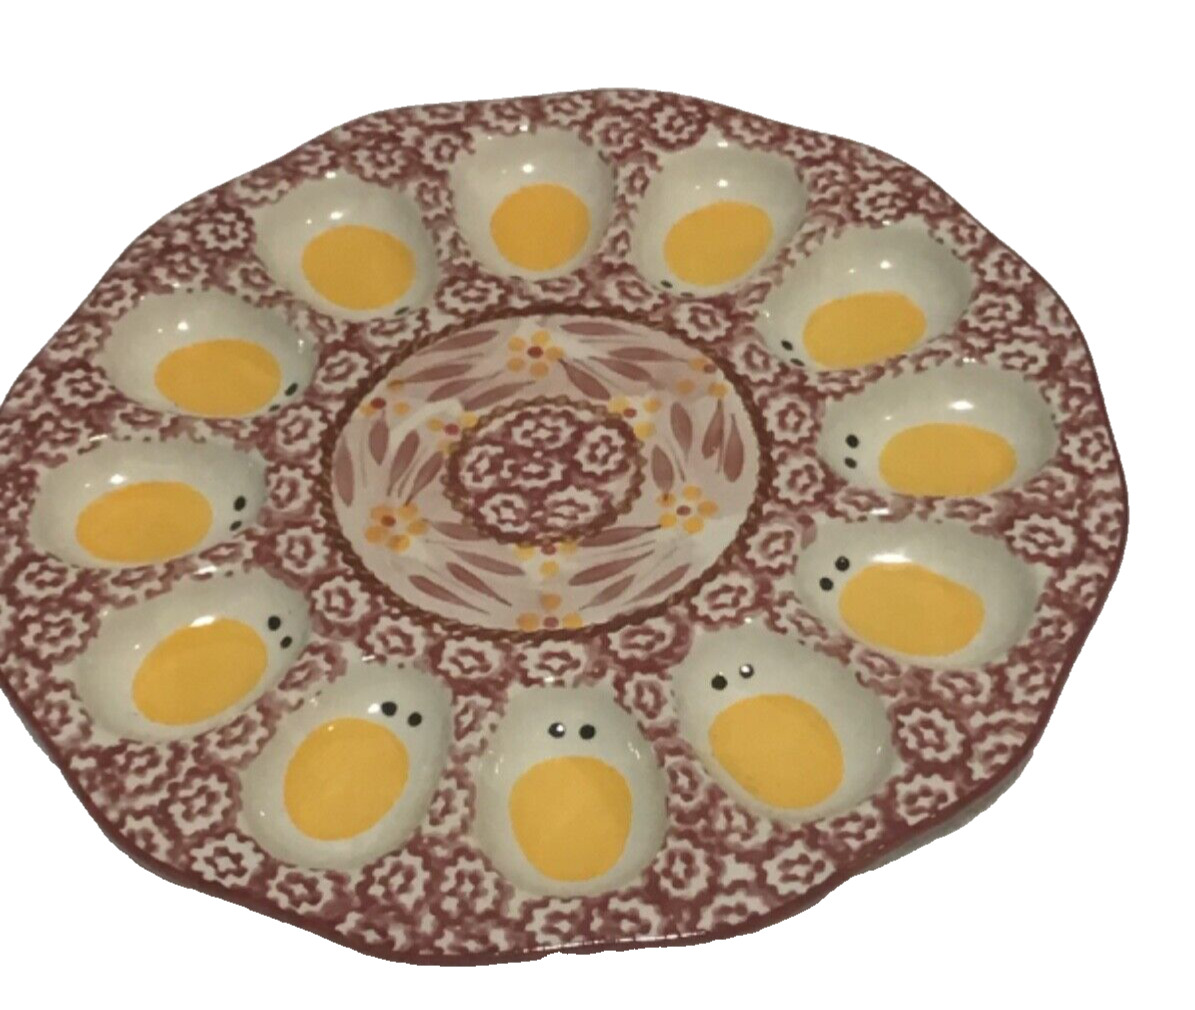 Temp-tations 10” Hand Painted Deviled Egg Chick Egg Platter Old World Red